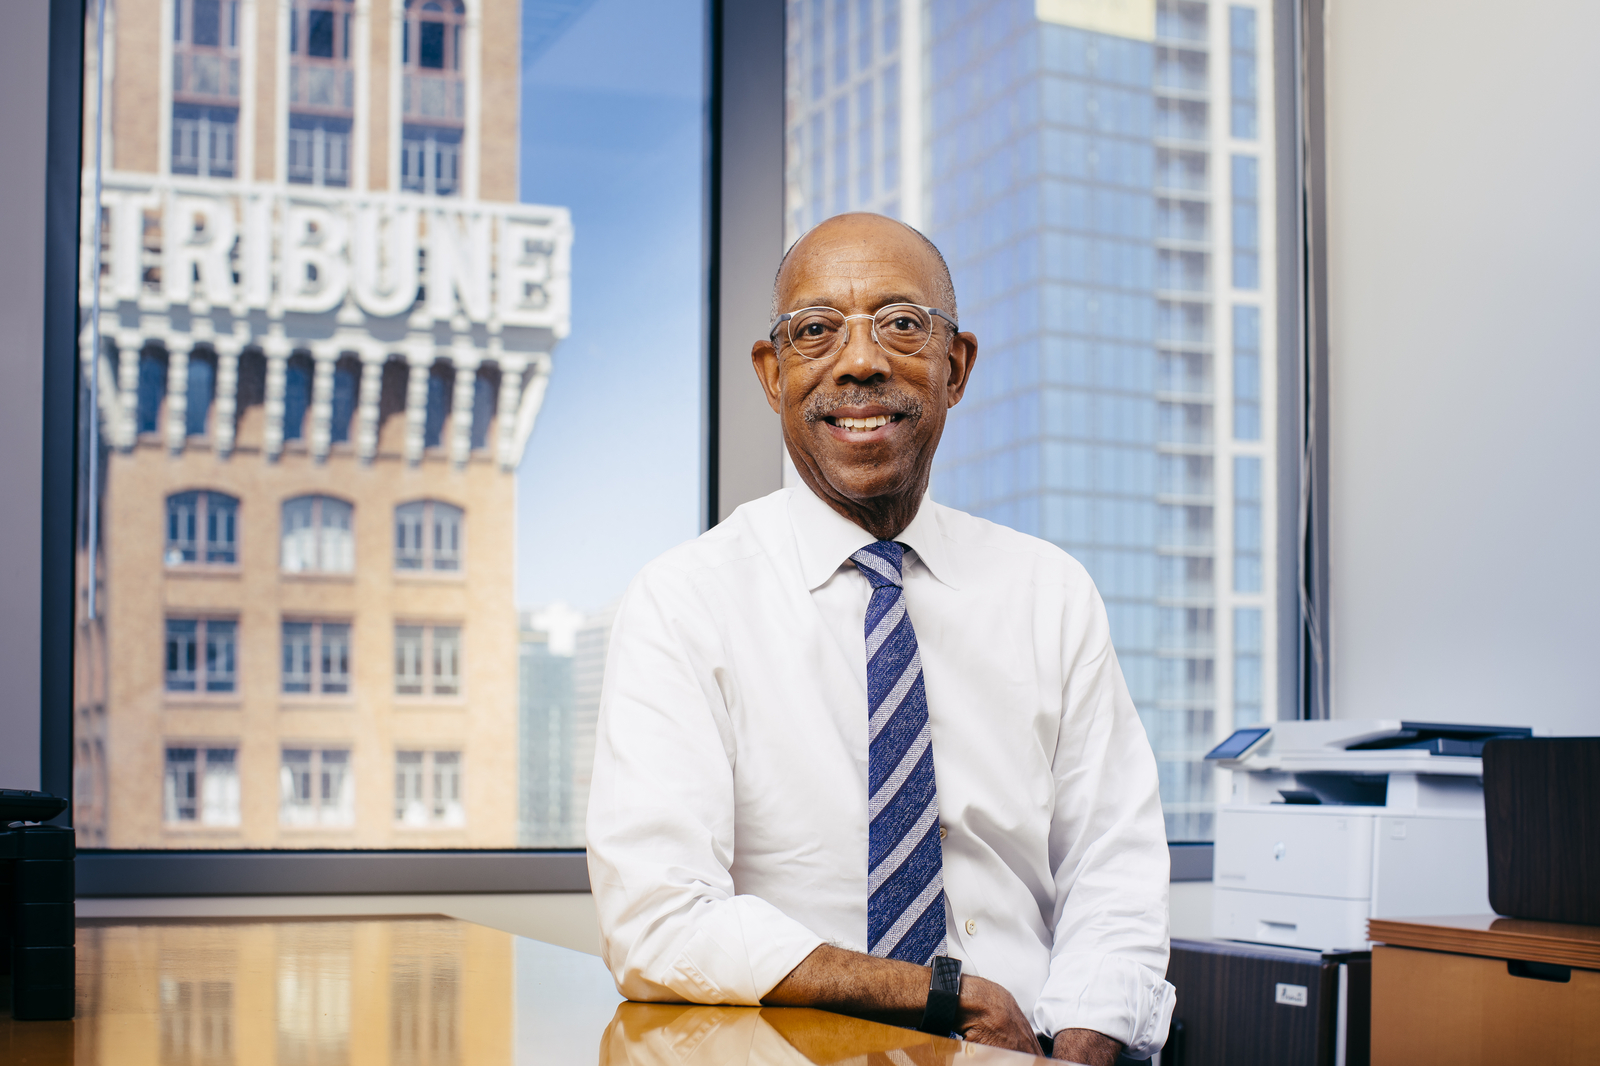 UC President Michael V. Drake, M.D., smiles for a portrait while sitting at a desk in his office. The Tribune Tower is visible out the window behind him. 